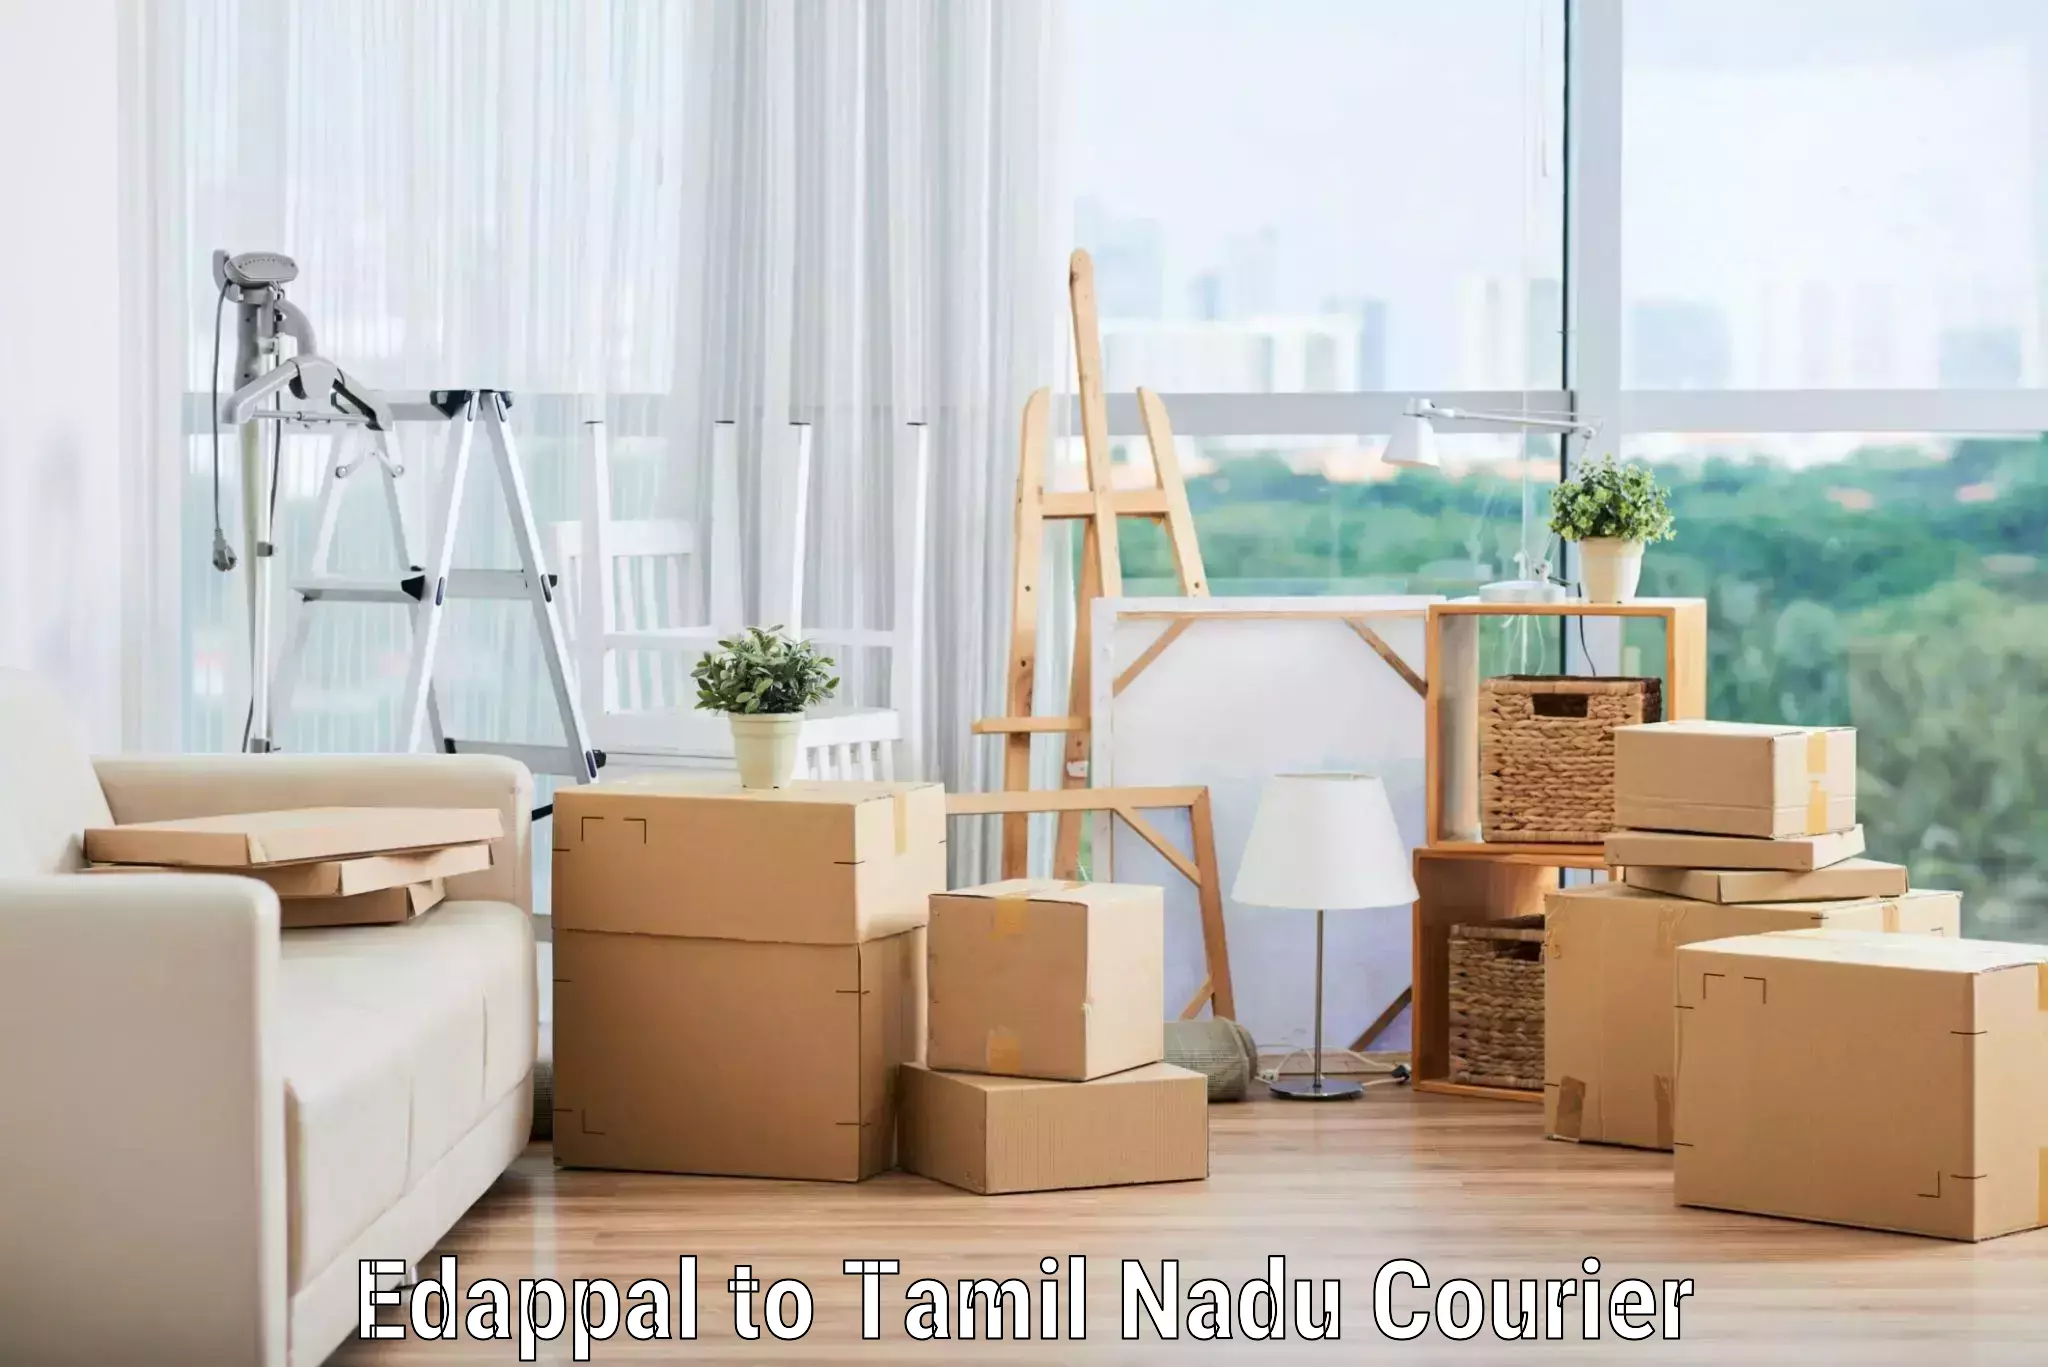 Professional movers and packers Edappal to Vriddhachalam